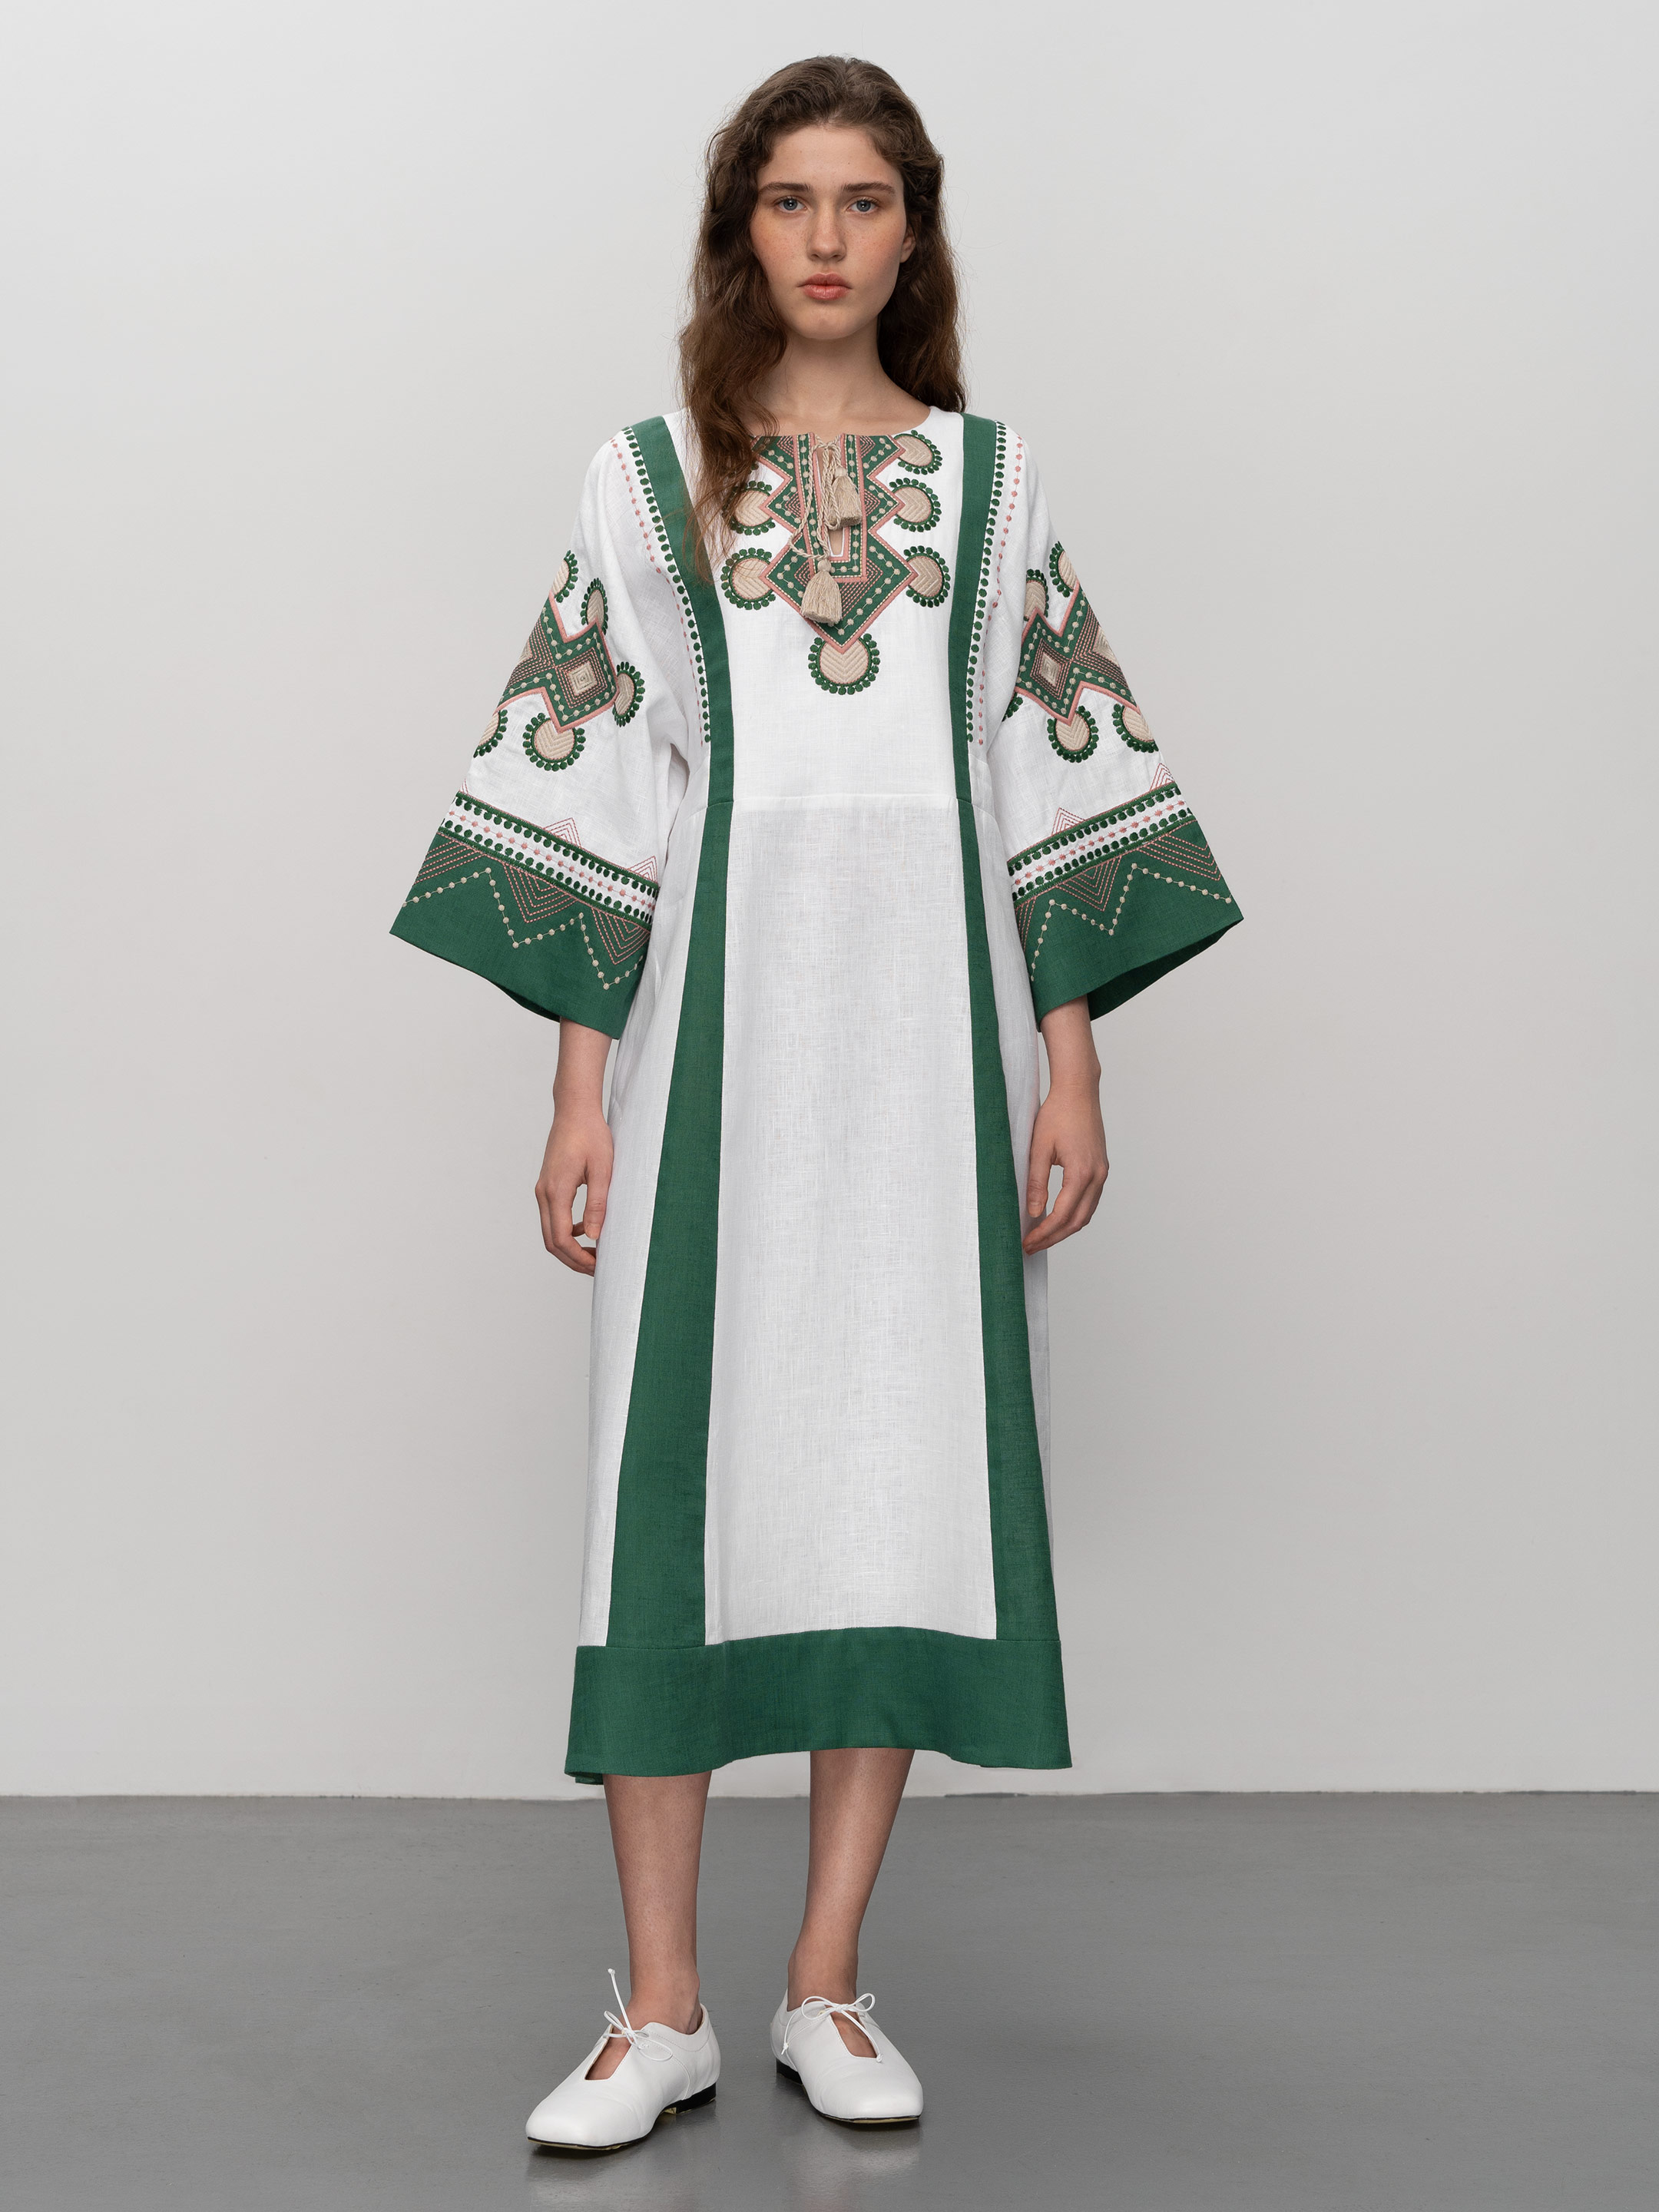 Free-cut white dress with embroidery Temple - photo 1